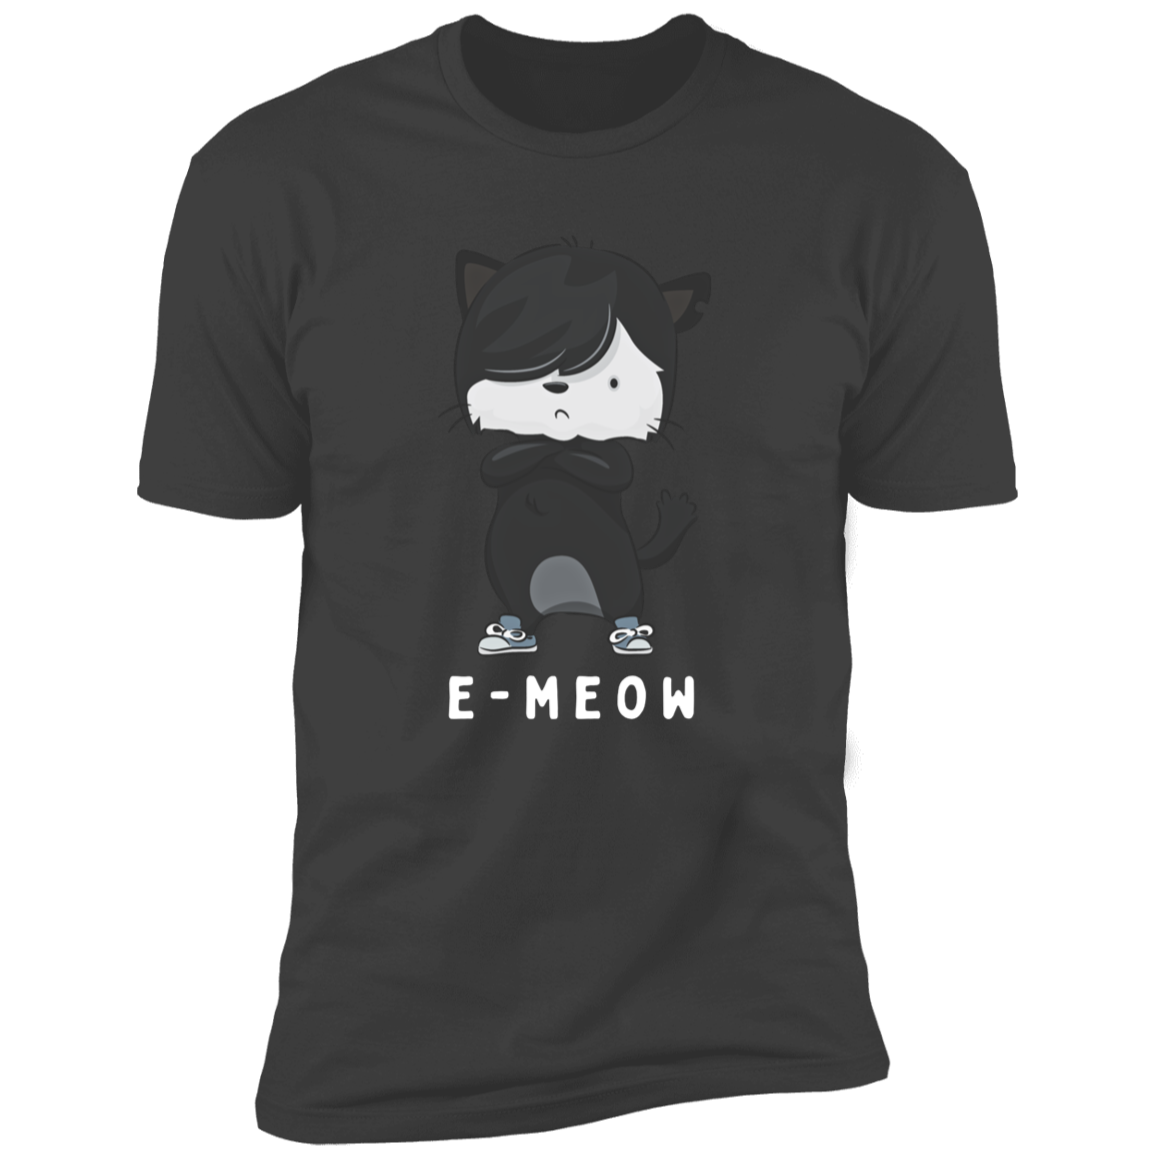 E-meow cat shirt, funny cat shirt for humans, cat mom and cat dad shirt, in heavy metal gray